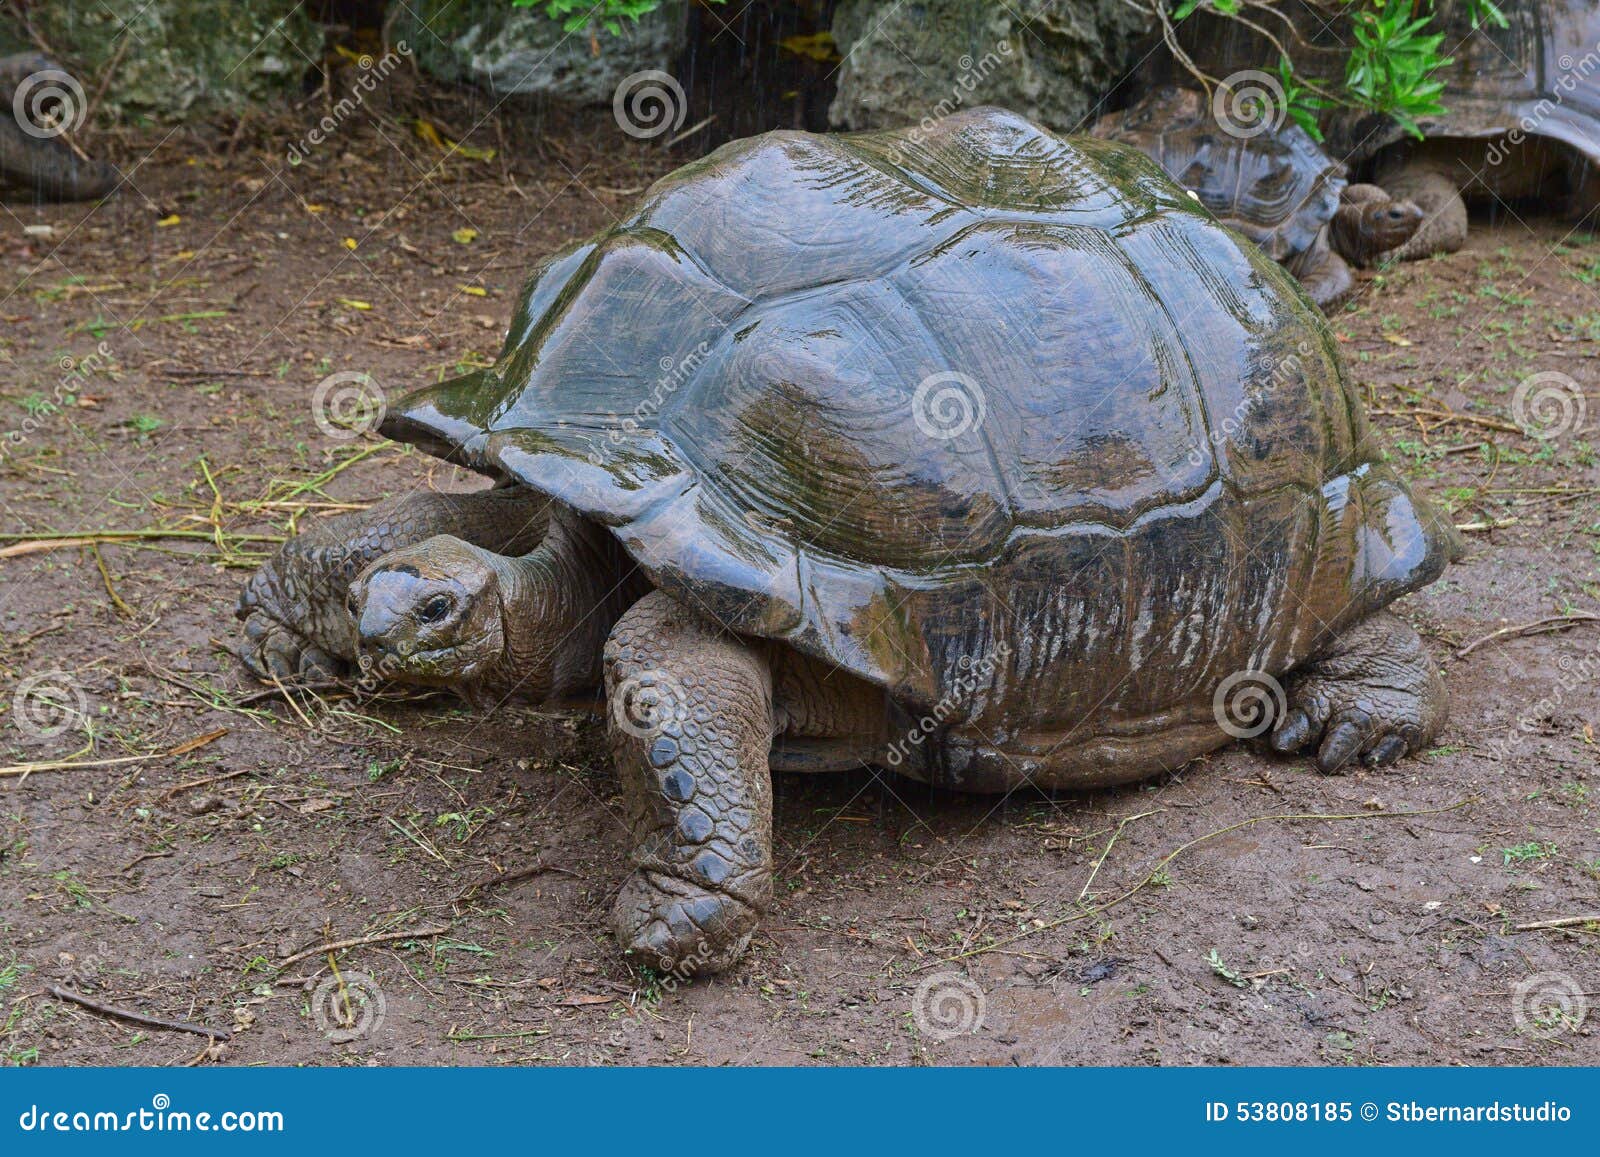 the largest tortoise in the park trying to find a dry shade during a downpour